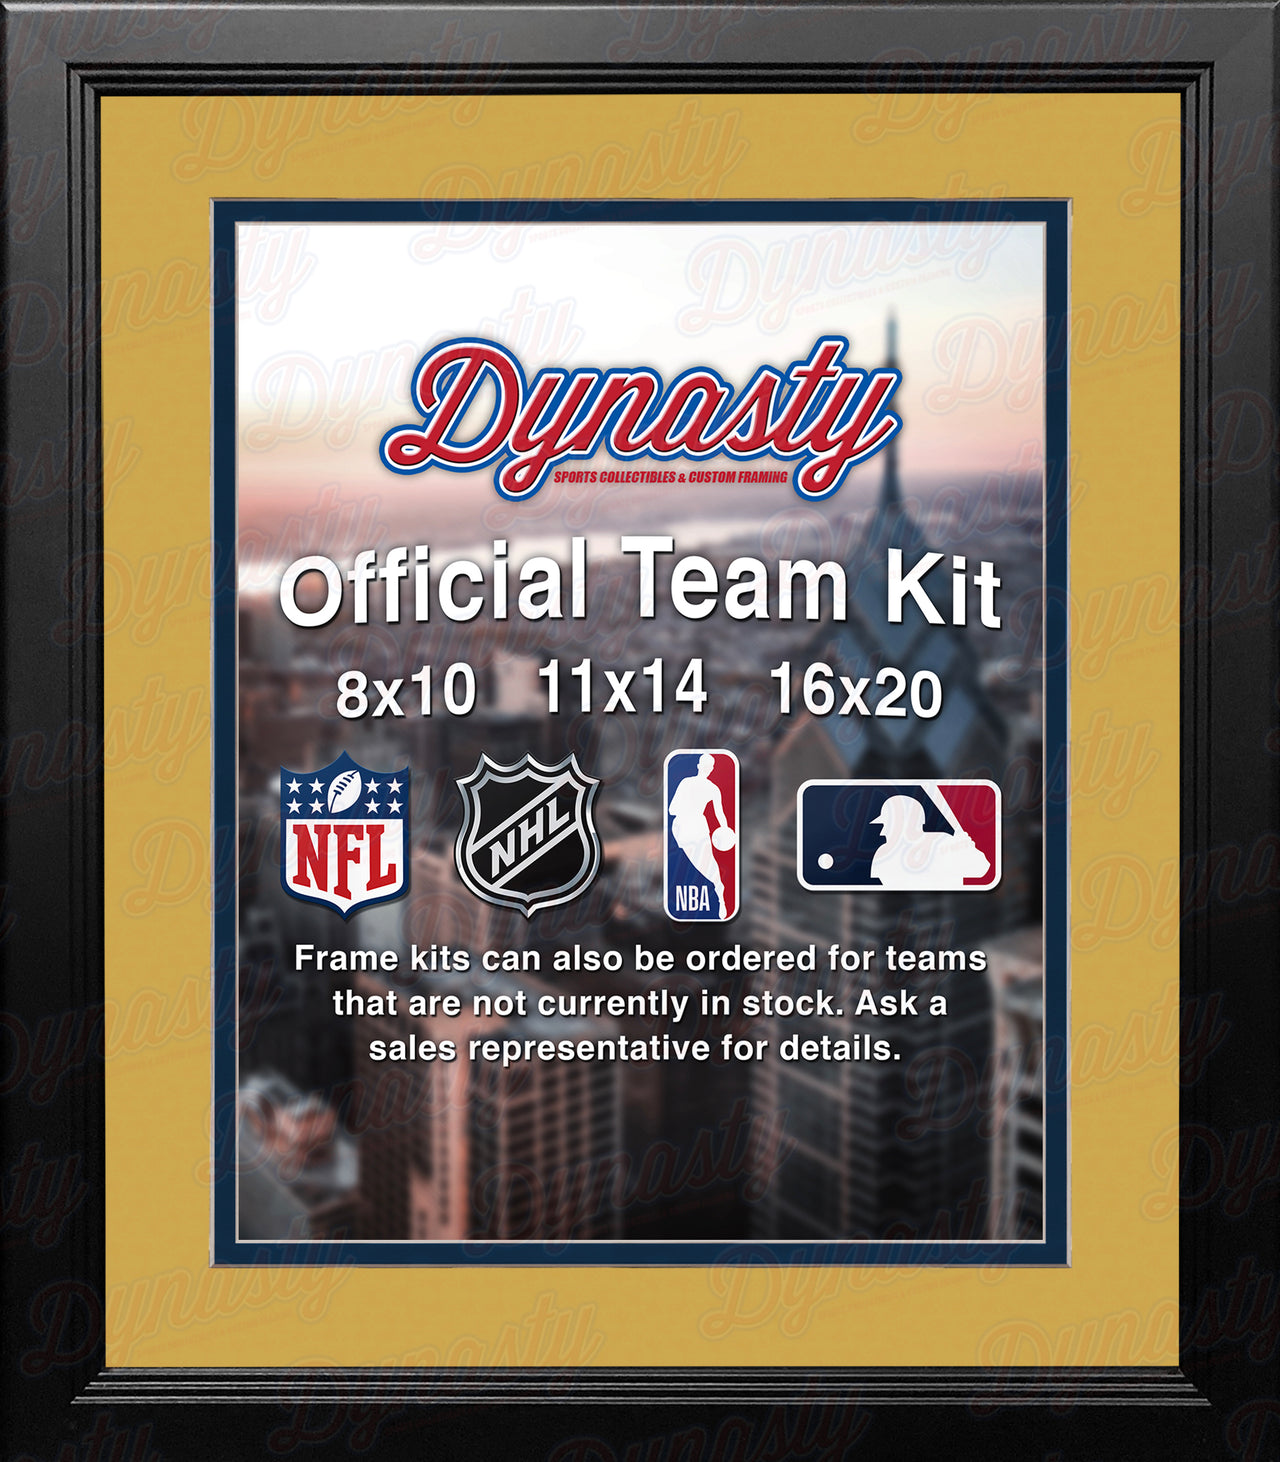 NBA Basketball Photo Picture Frame Kit - Indiana Pacers (Yellow Matting, Navy Trim) - Dynasty Sports & Framing 